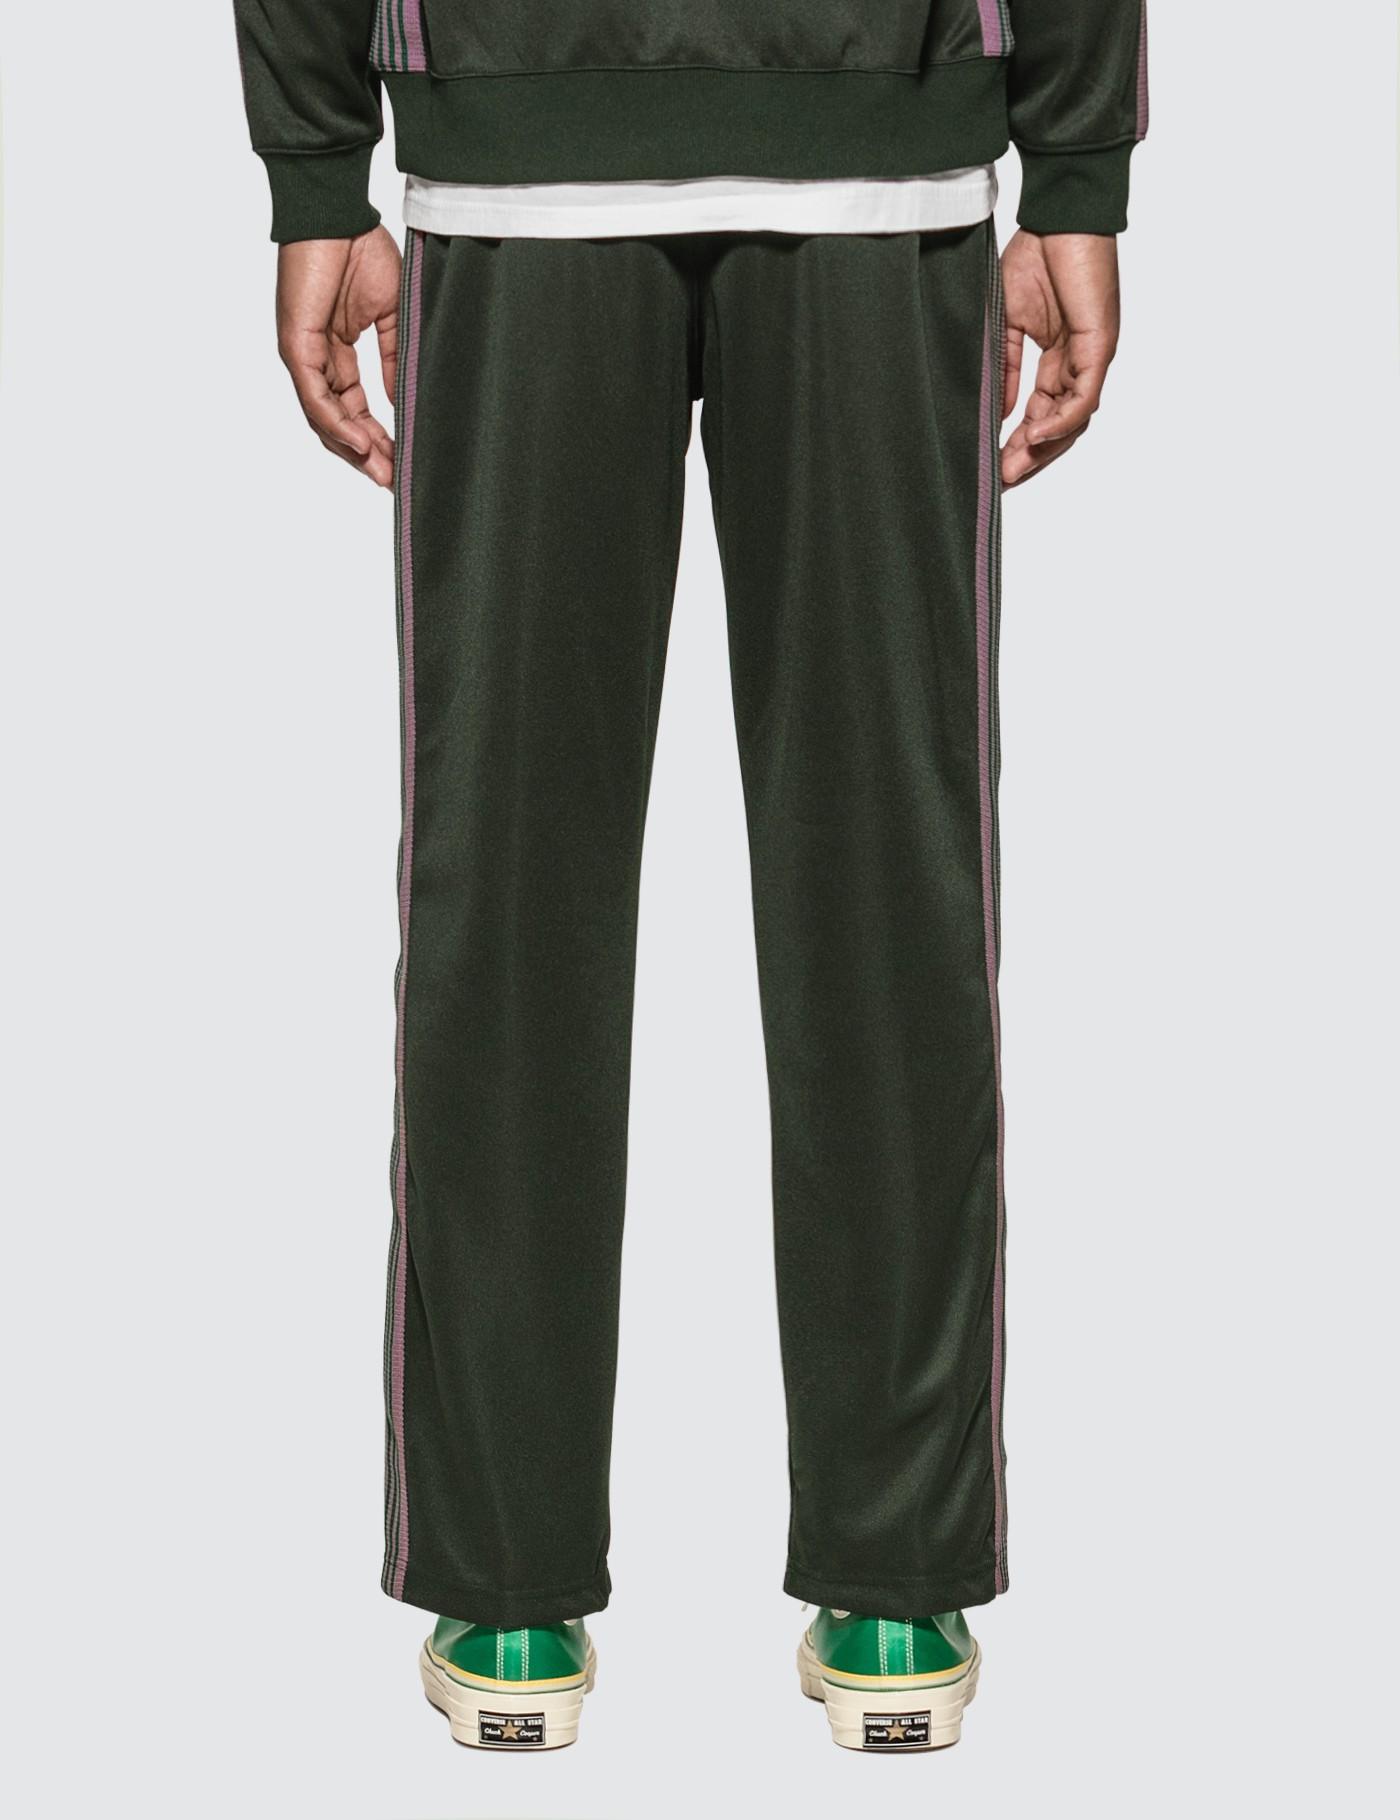 Needles Poly Smooth Track Pants in Green for Men - Lyst